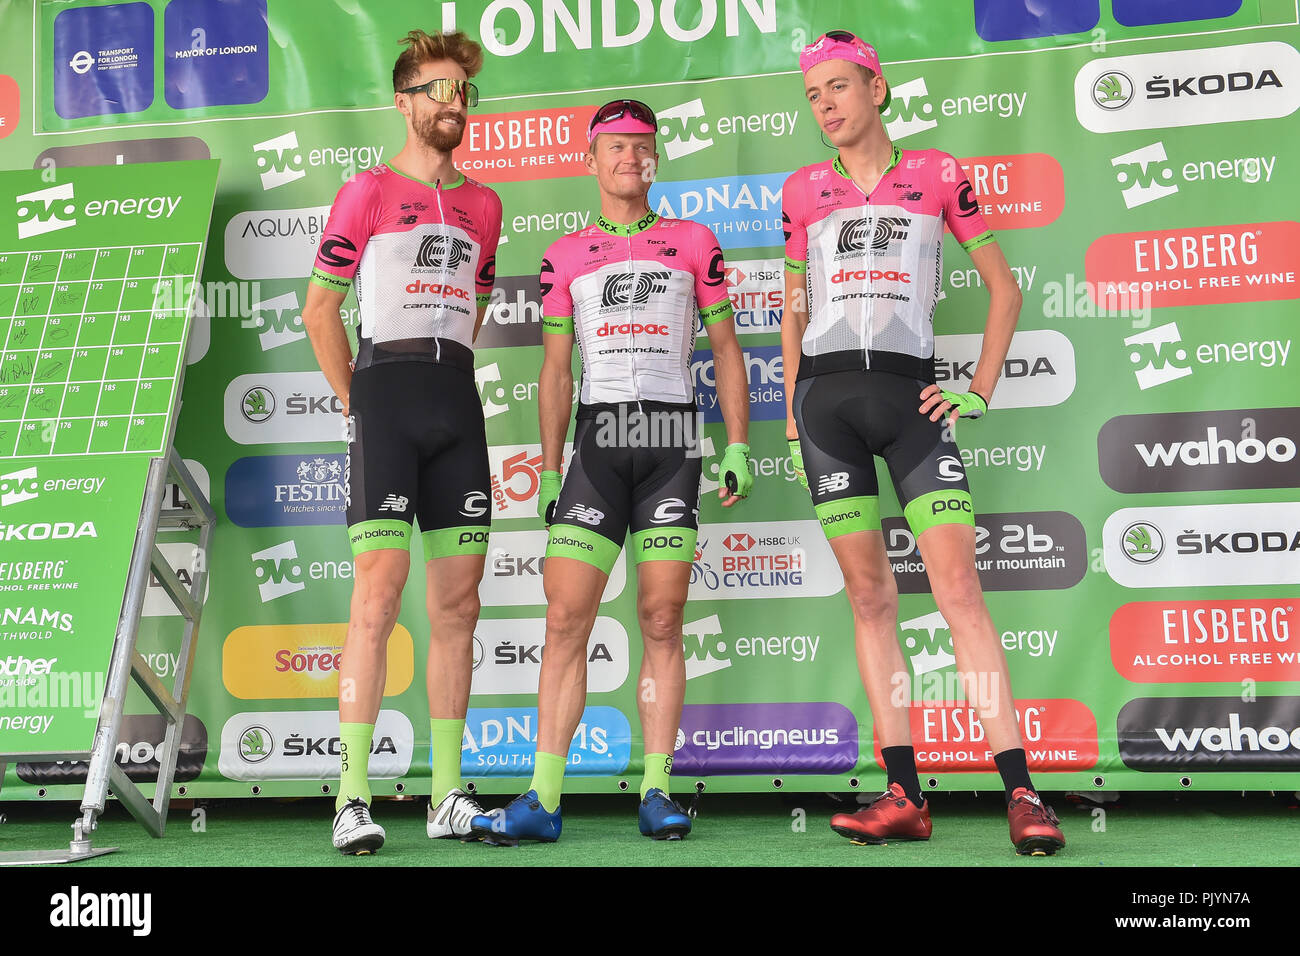 London, UK. 9th Sept 2018. Team EF Education First - Drapac P/B Cannondale  (Dan McLay, Matti Breschel, Hugh Carthy, José Neves, Taylor Phinney and Sacha Modolo) at team presentation during 2018 OVO Energy Tour of Britain - Stage Eight: The London Stage on Sunday, September 09, 2018, LONDON ENGLAND: Credit: Taka Wu/Alamy Live News Stock Photo